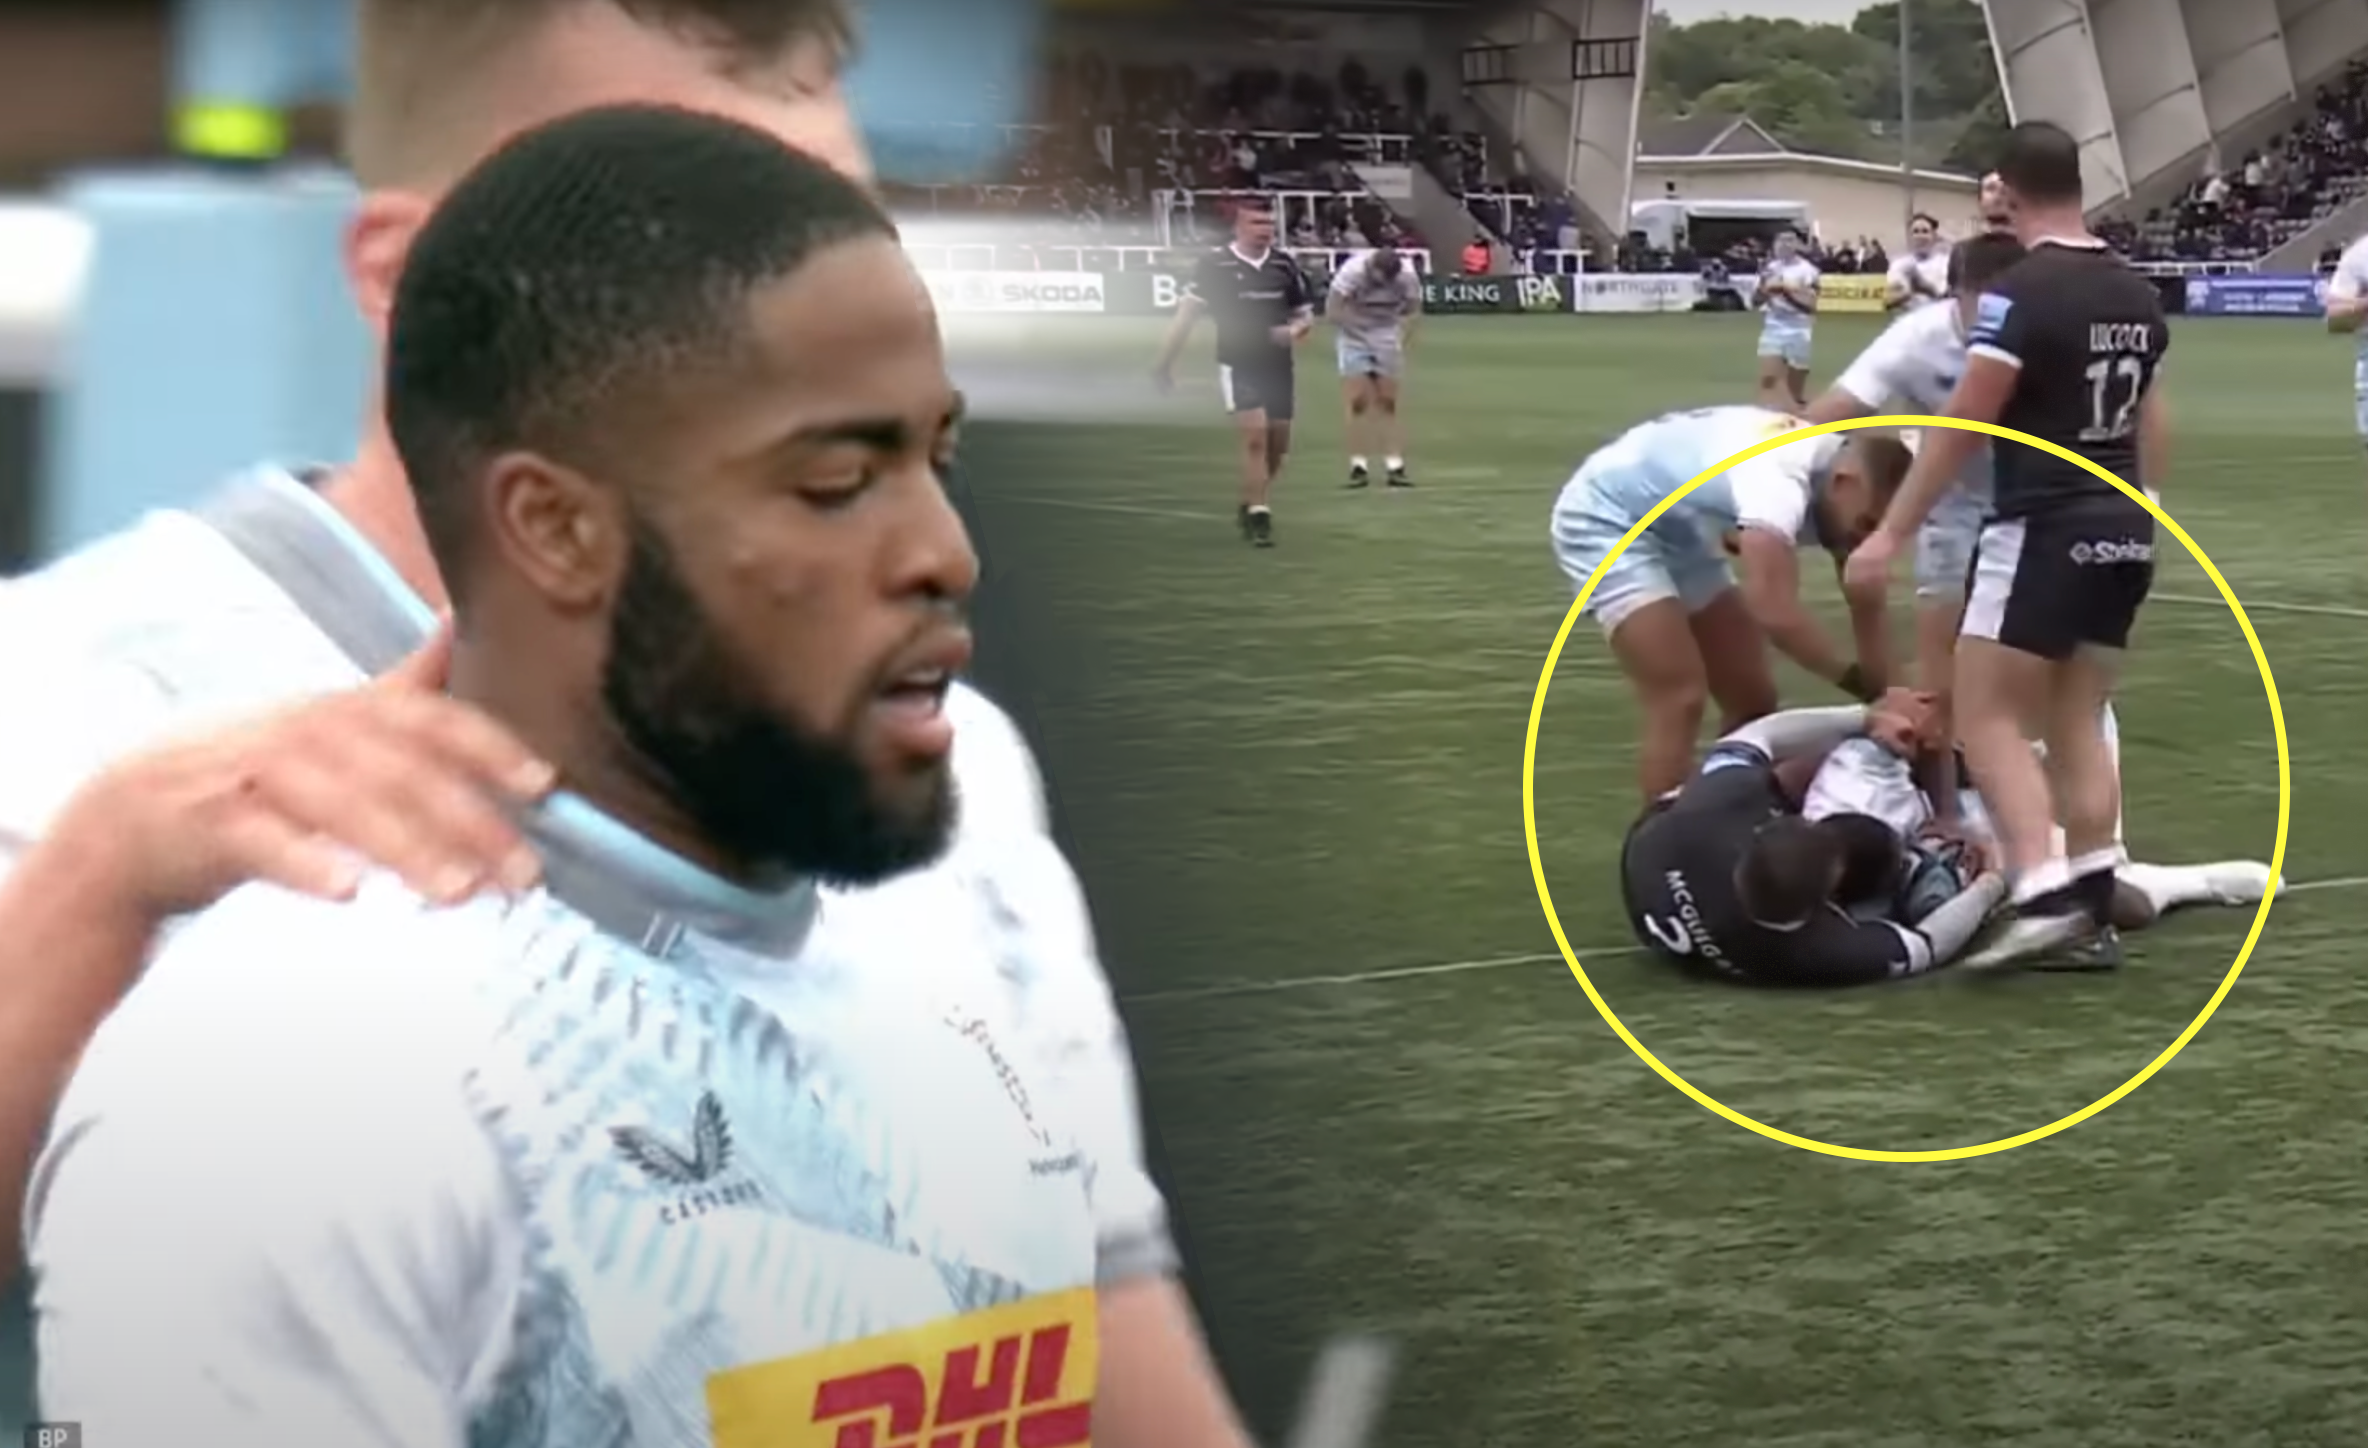 Harlequins might have already scored the try of the season